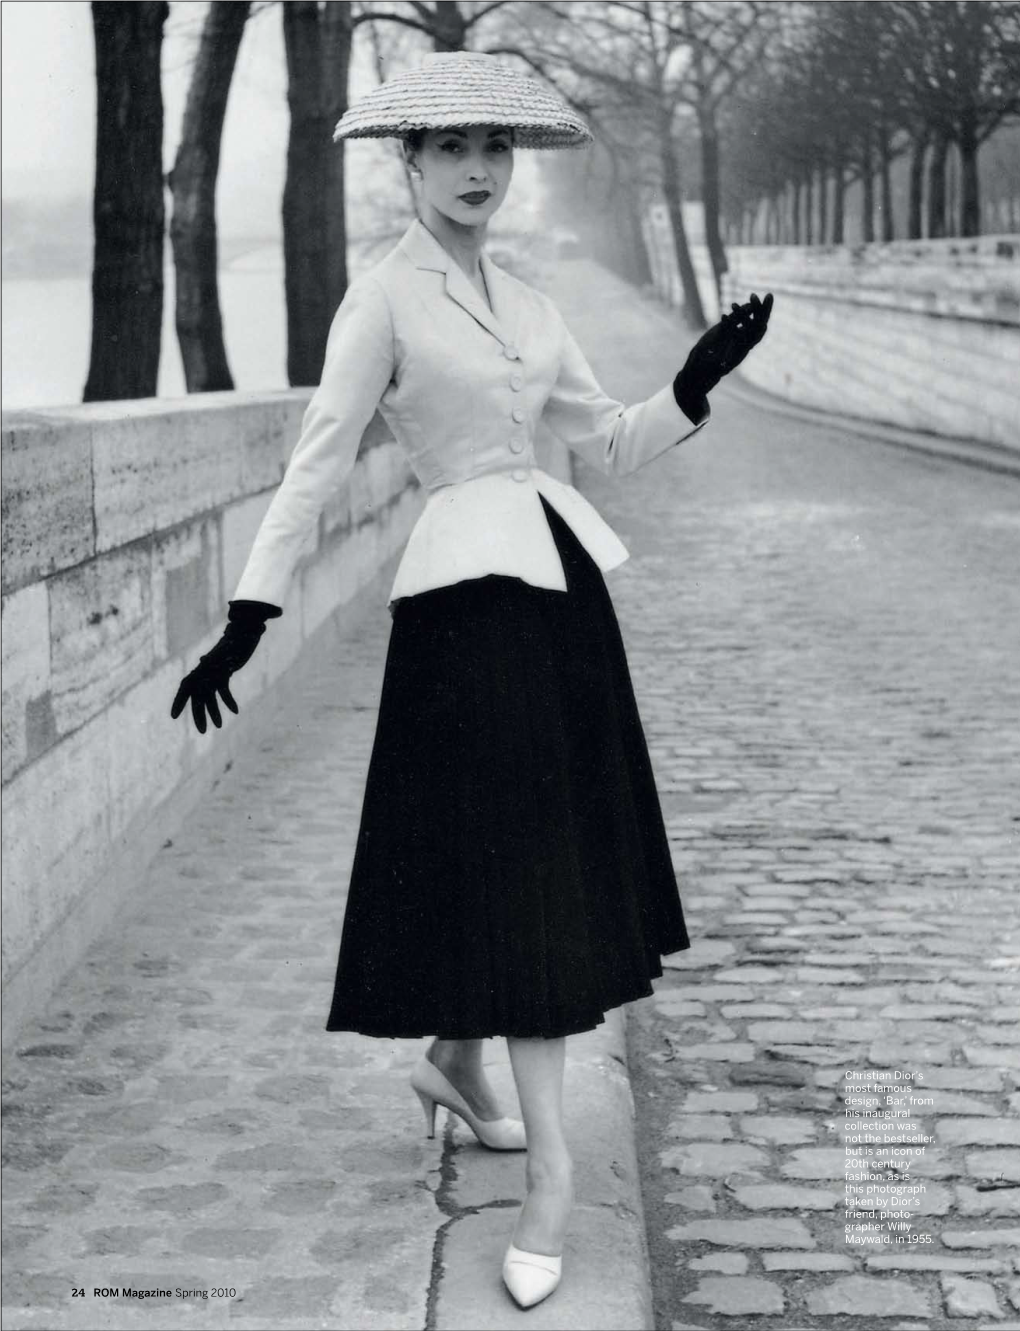 Christian Dior's Most Famous Design